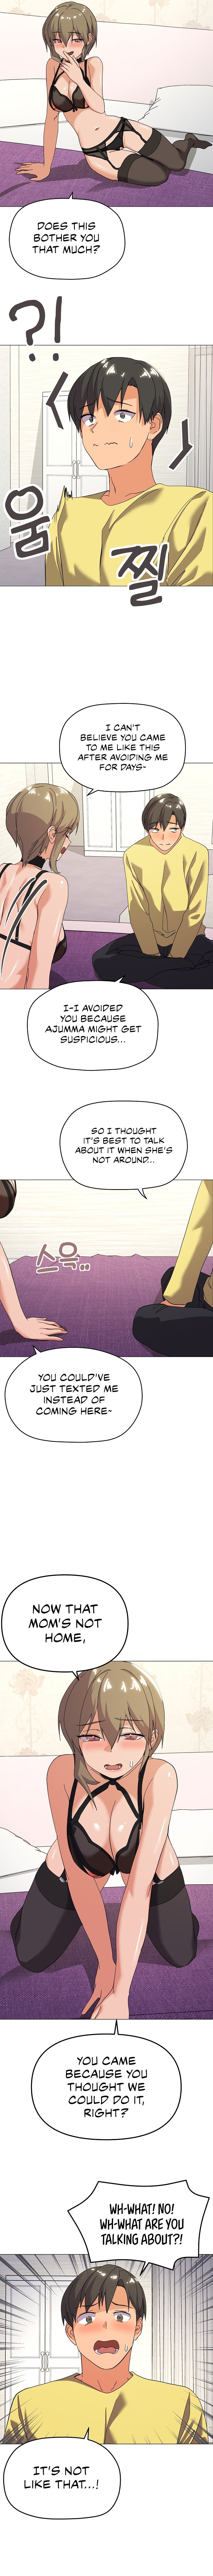 What’s wrong with this family? - Chapter 13 Page 6